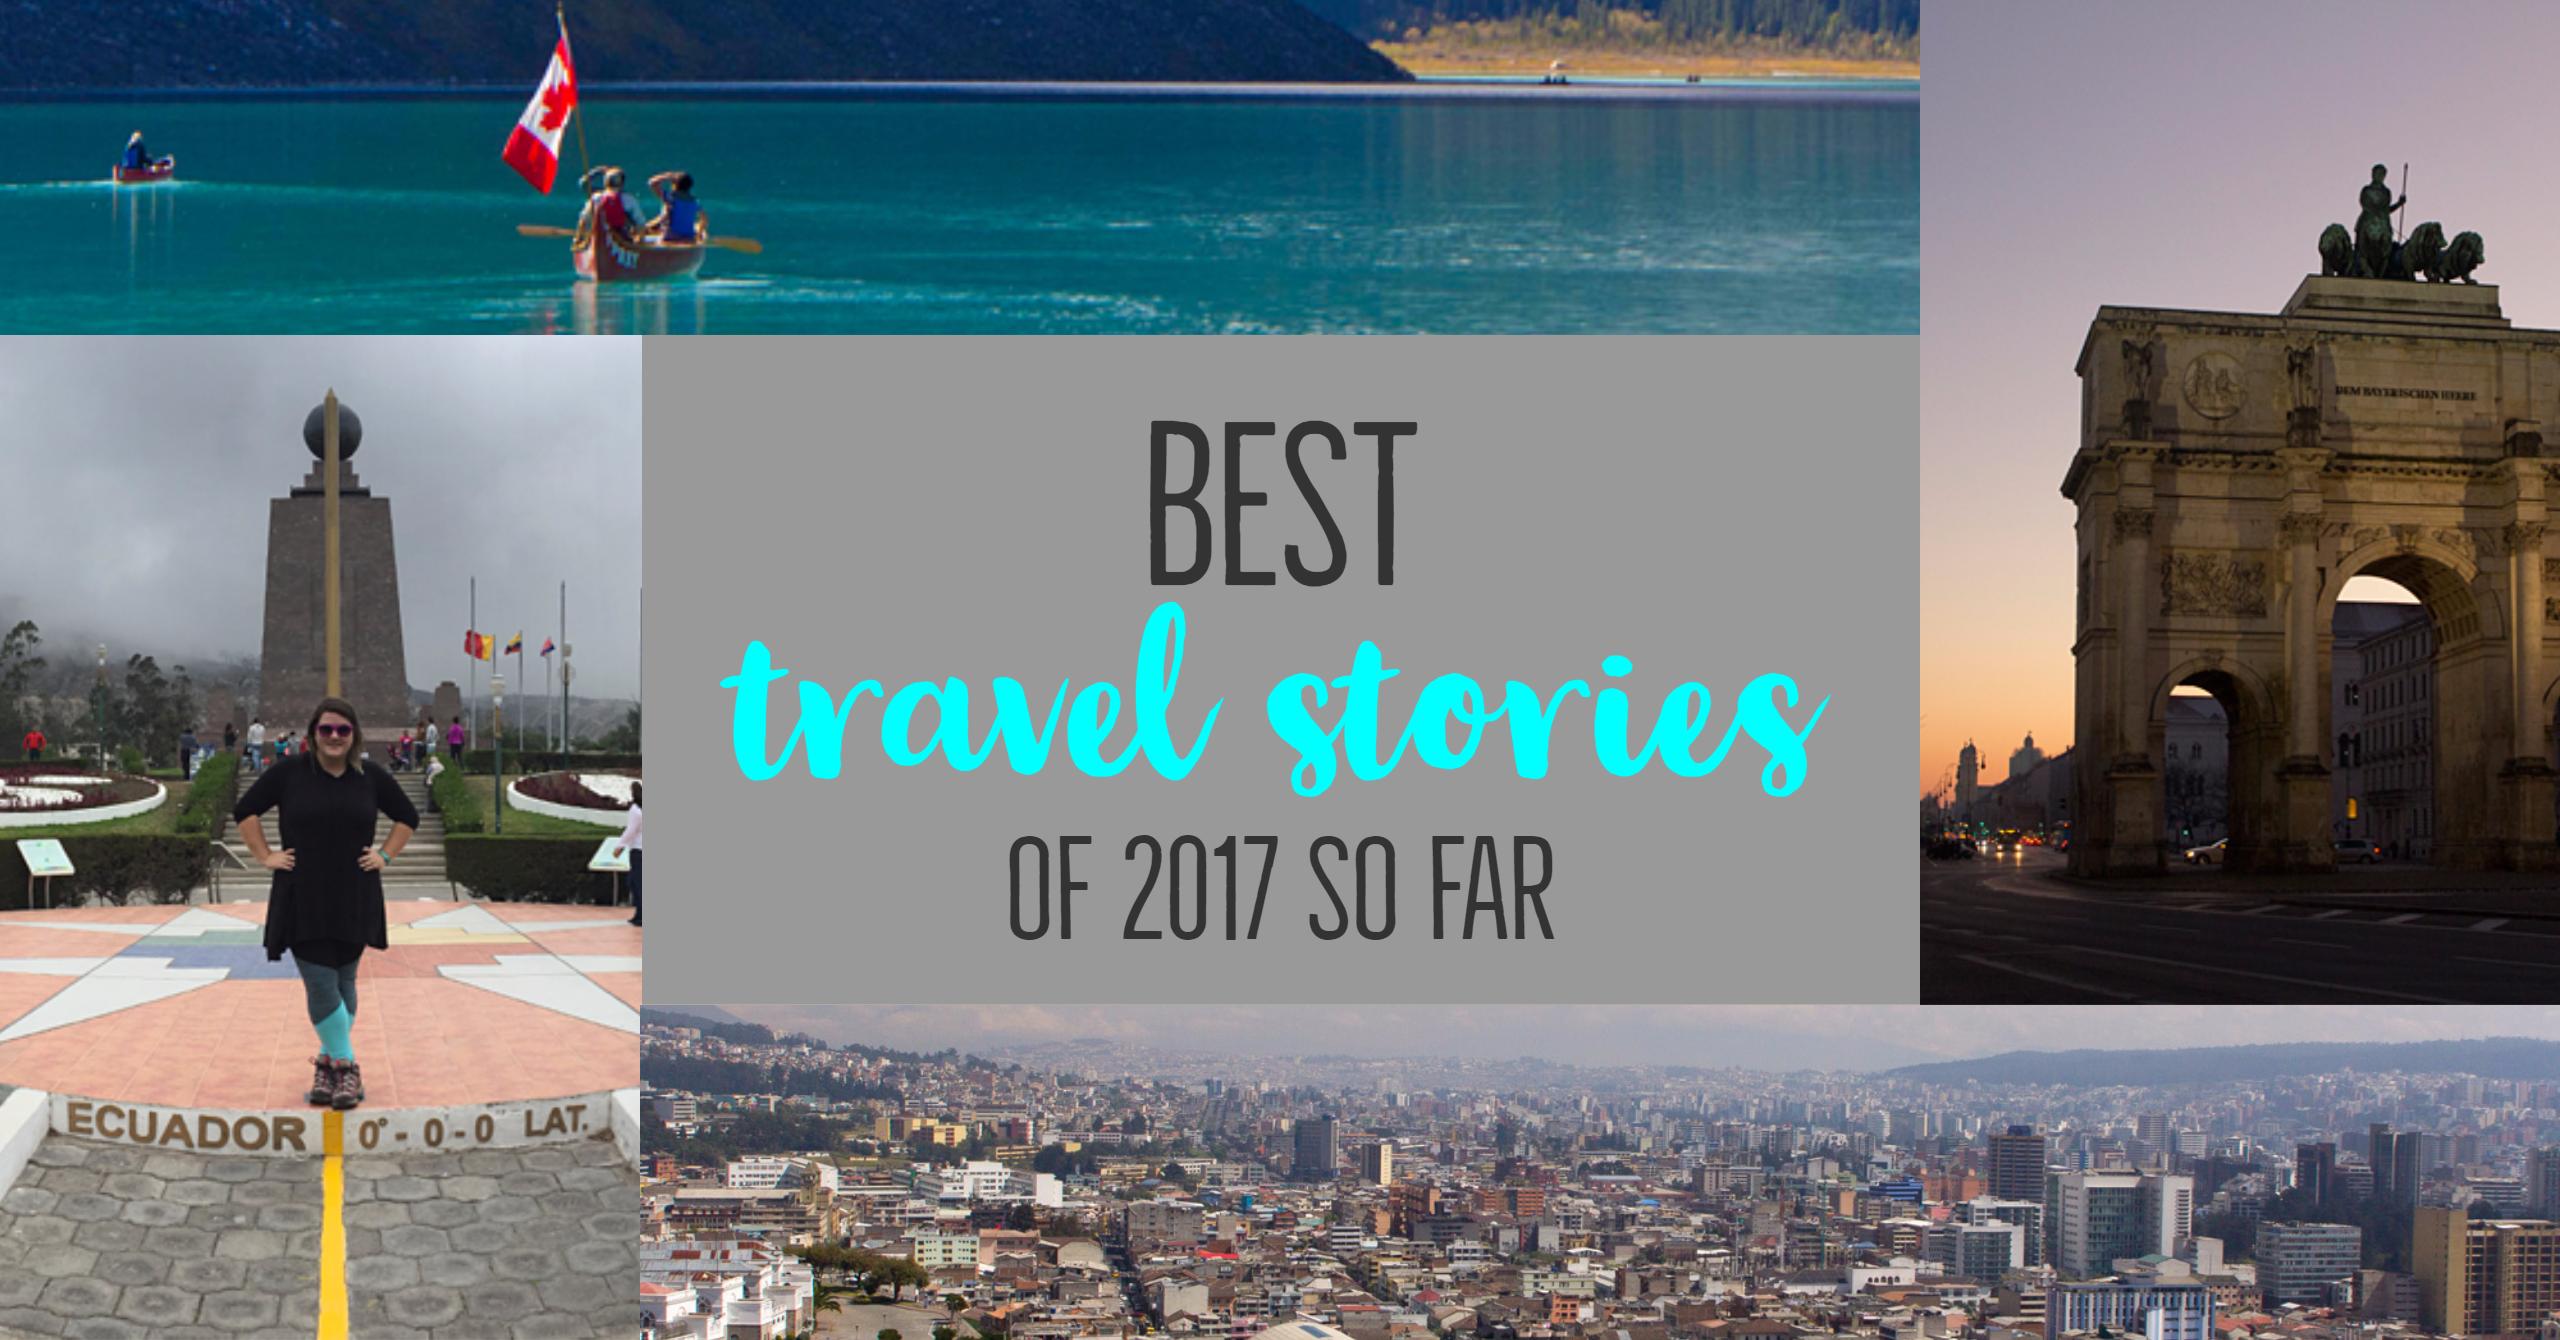 From castles to tortoises to giant marionettes, here are my favourite travel stories from 2017 so far | My Wandering Voyage travel blog